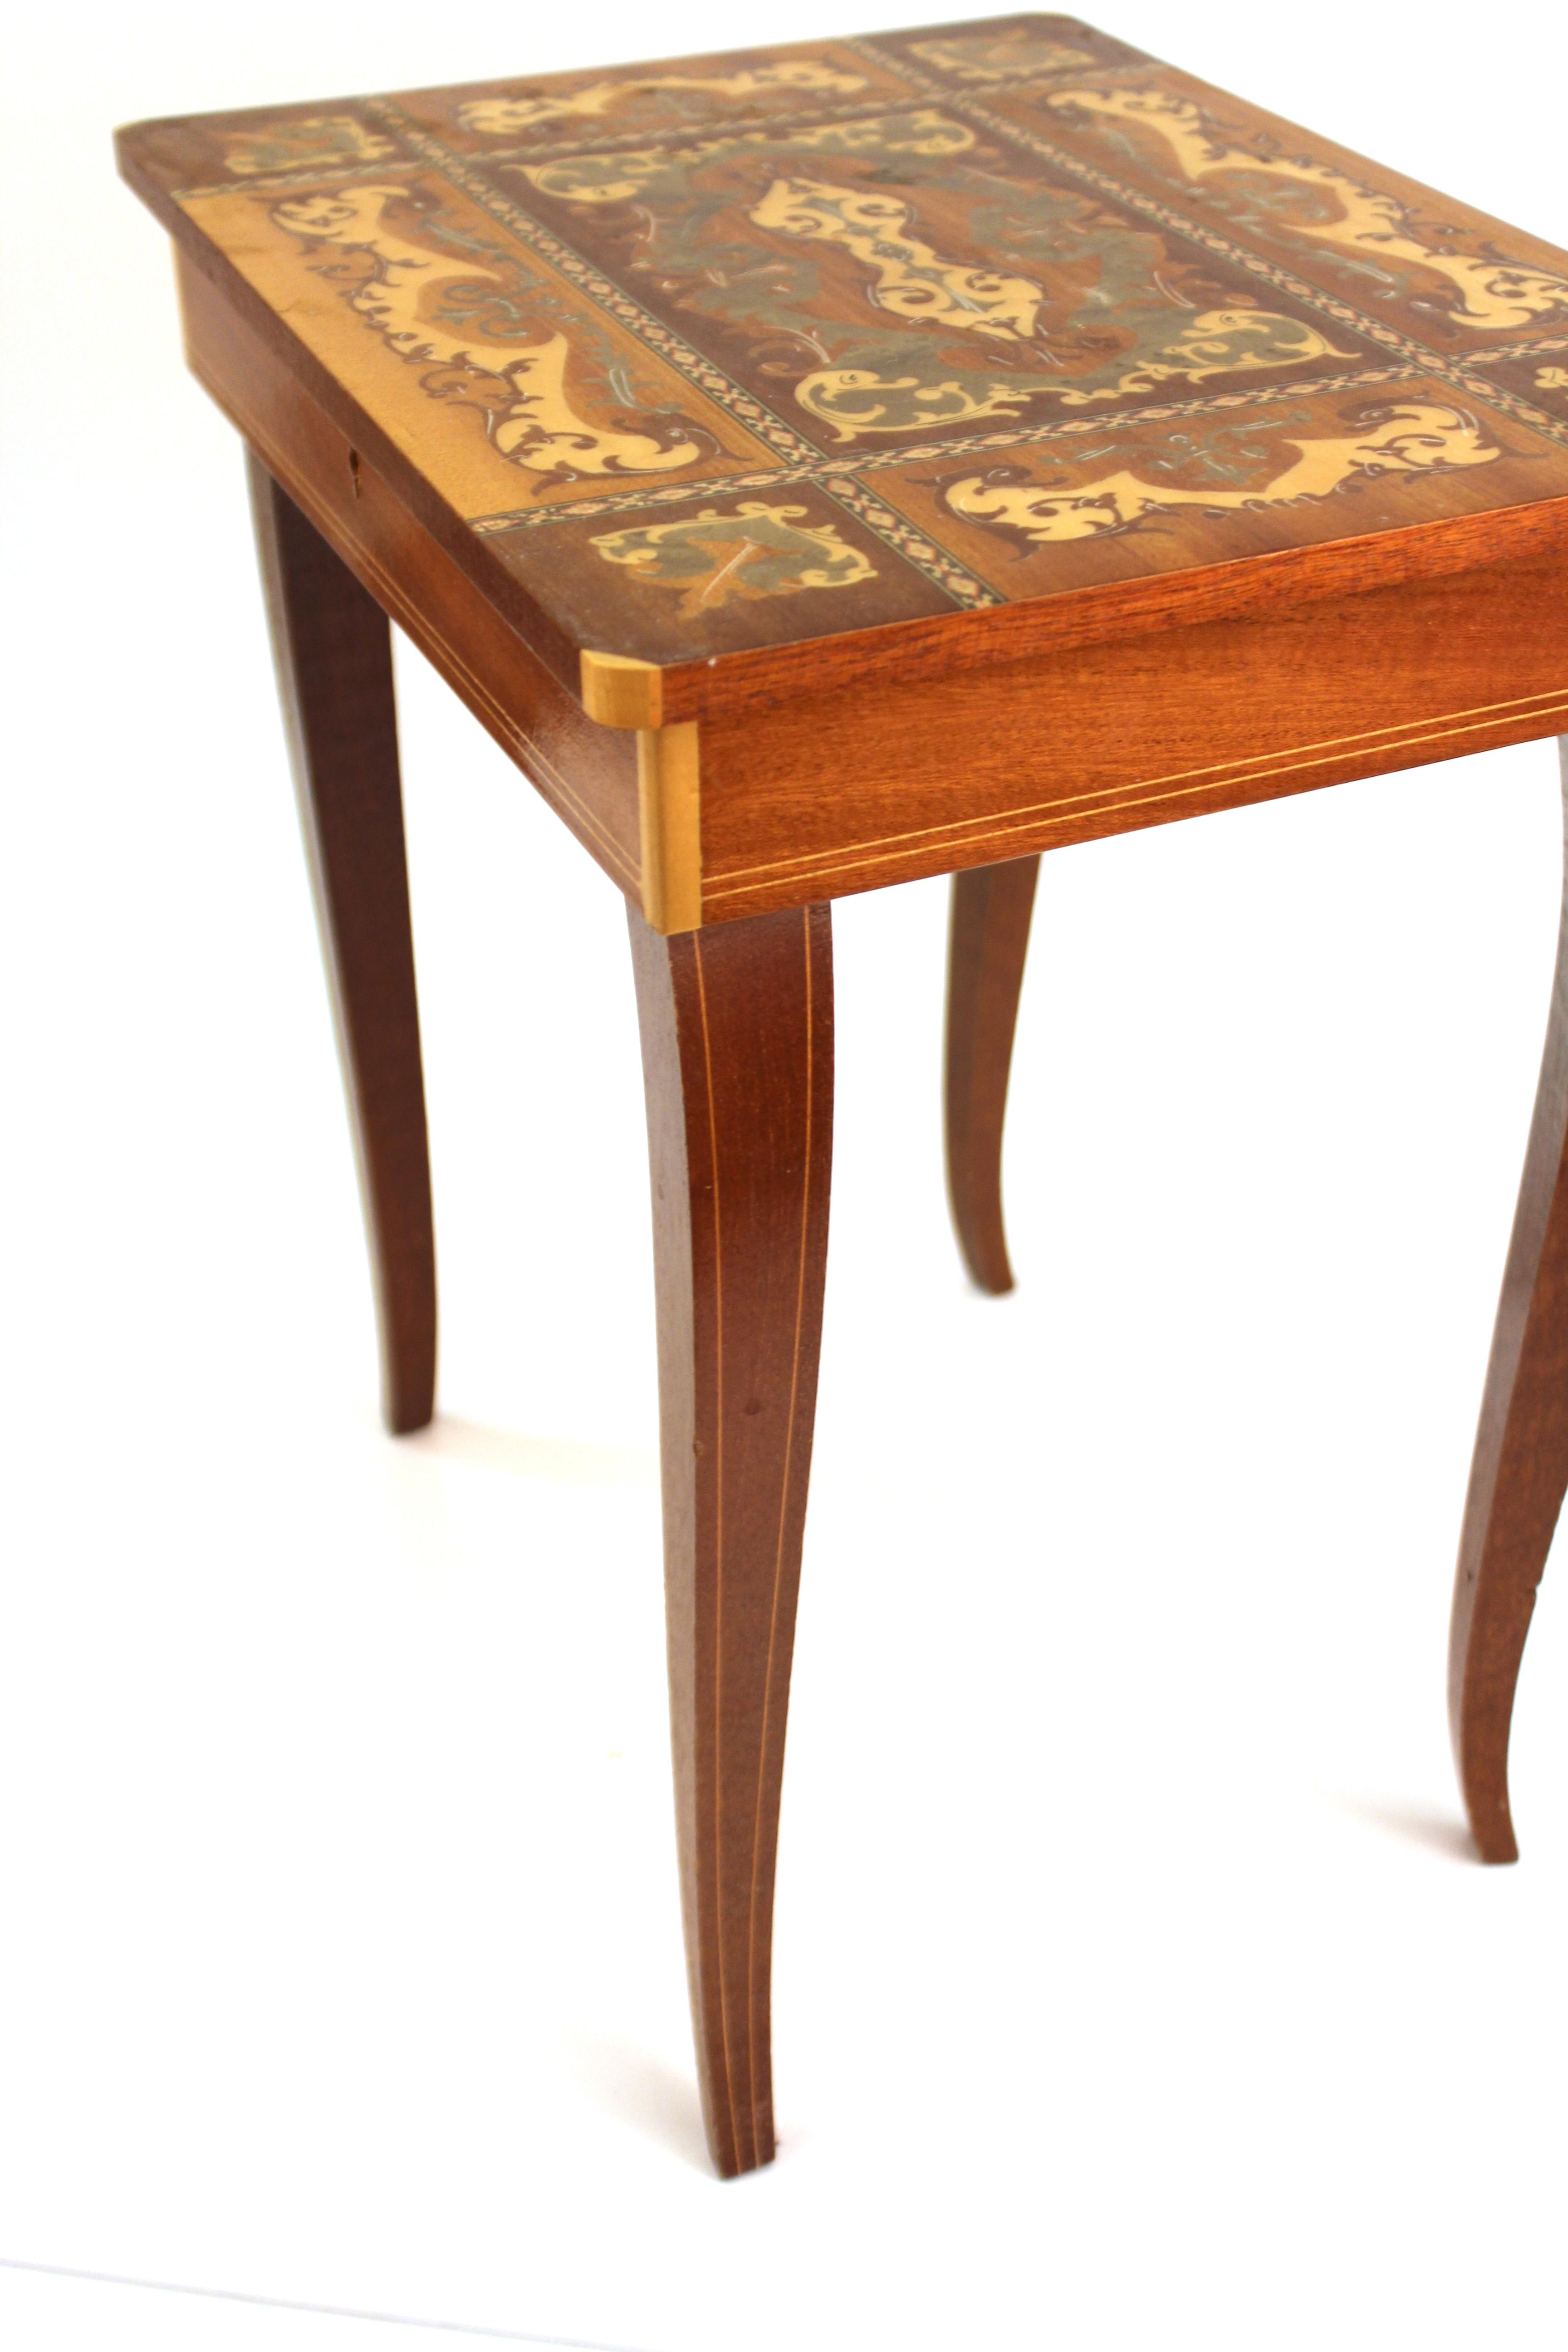 midcentury italian sorrento musical table with wood inlay for img master accent razer mouse ouroboros glass top coffee and end tables butler specialty console lamps without